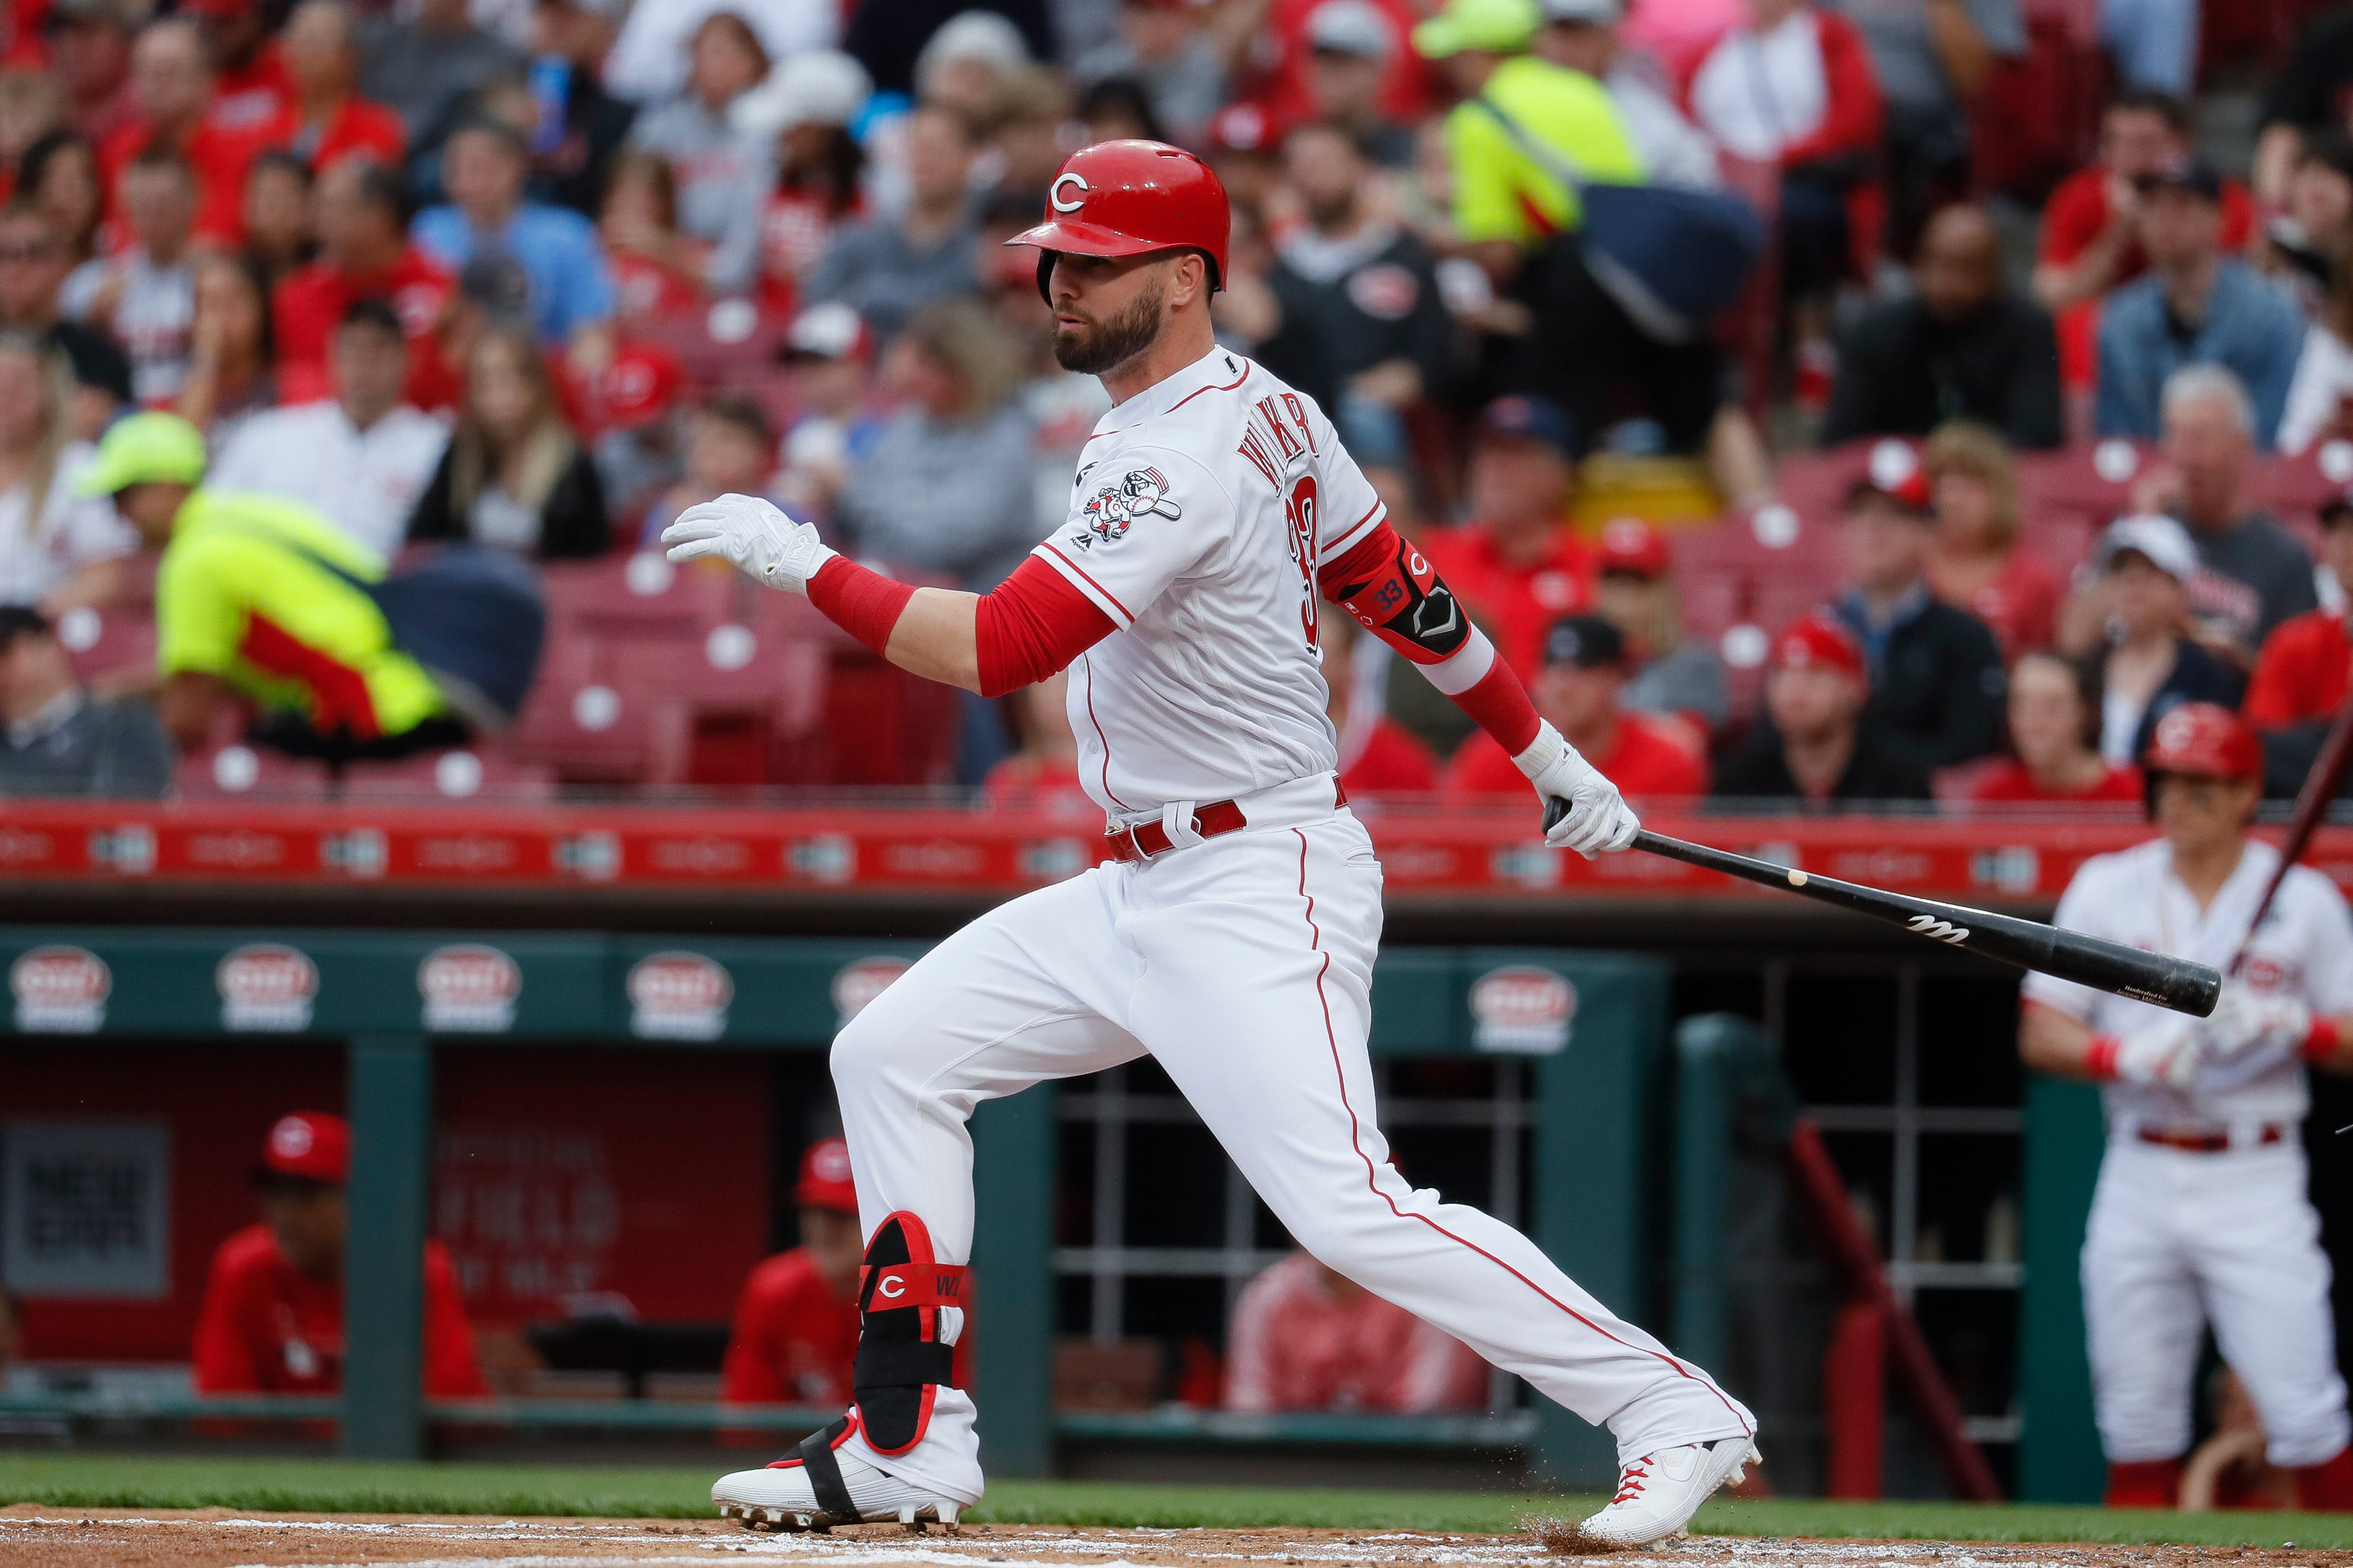 Buffalo's Jesse Winker named National League starting outfielder for MLB  All-Star Game